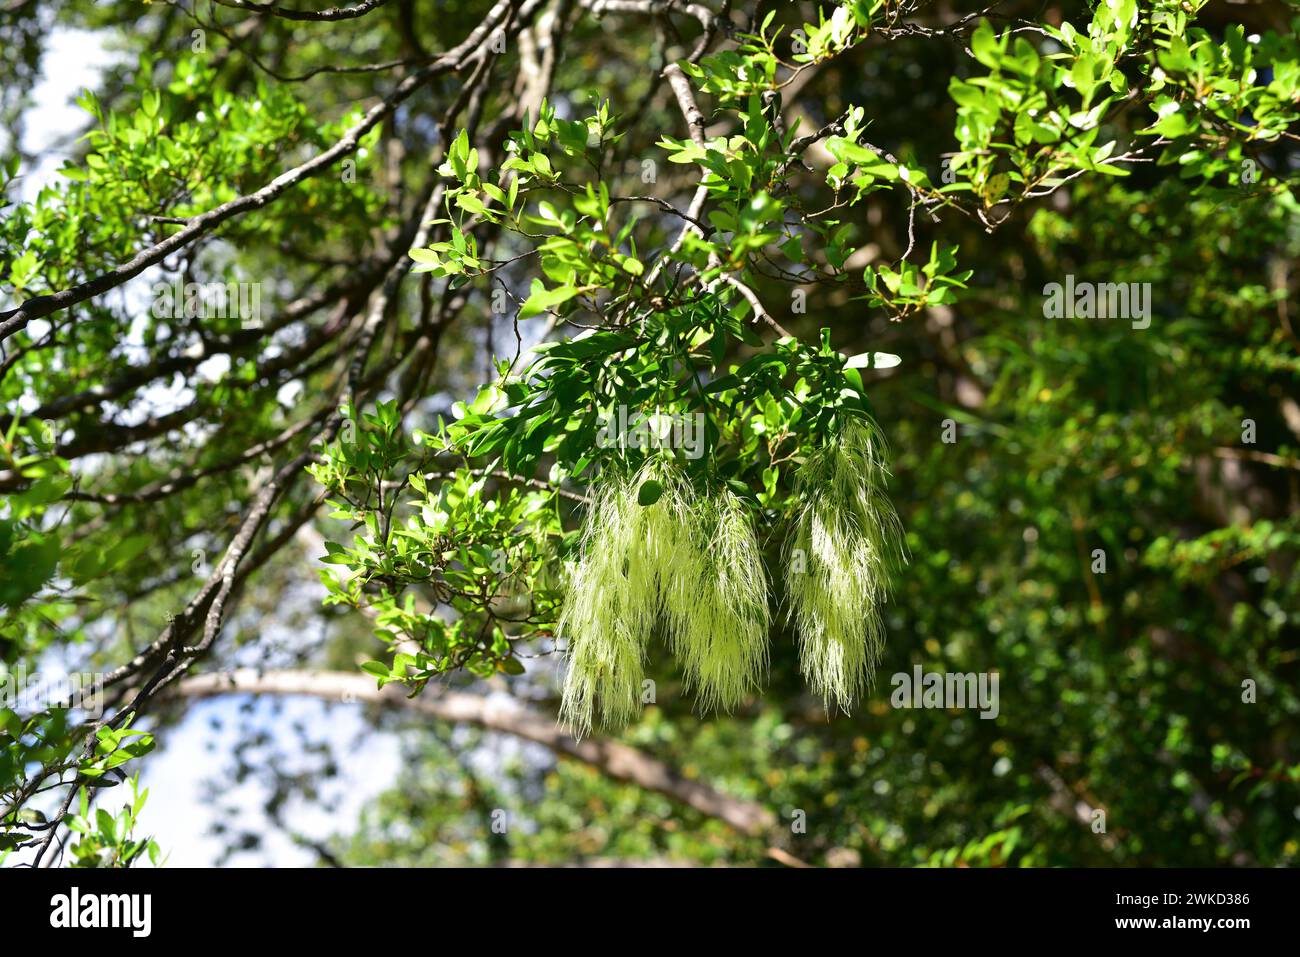 Injerto or feathery mistletoe (Misodendrum linearifolium) is an hemiparasitic plant native to central and southern Chile and southwestern Argentina. T Stock Photo